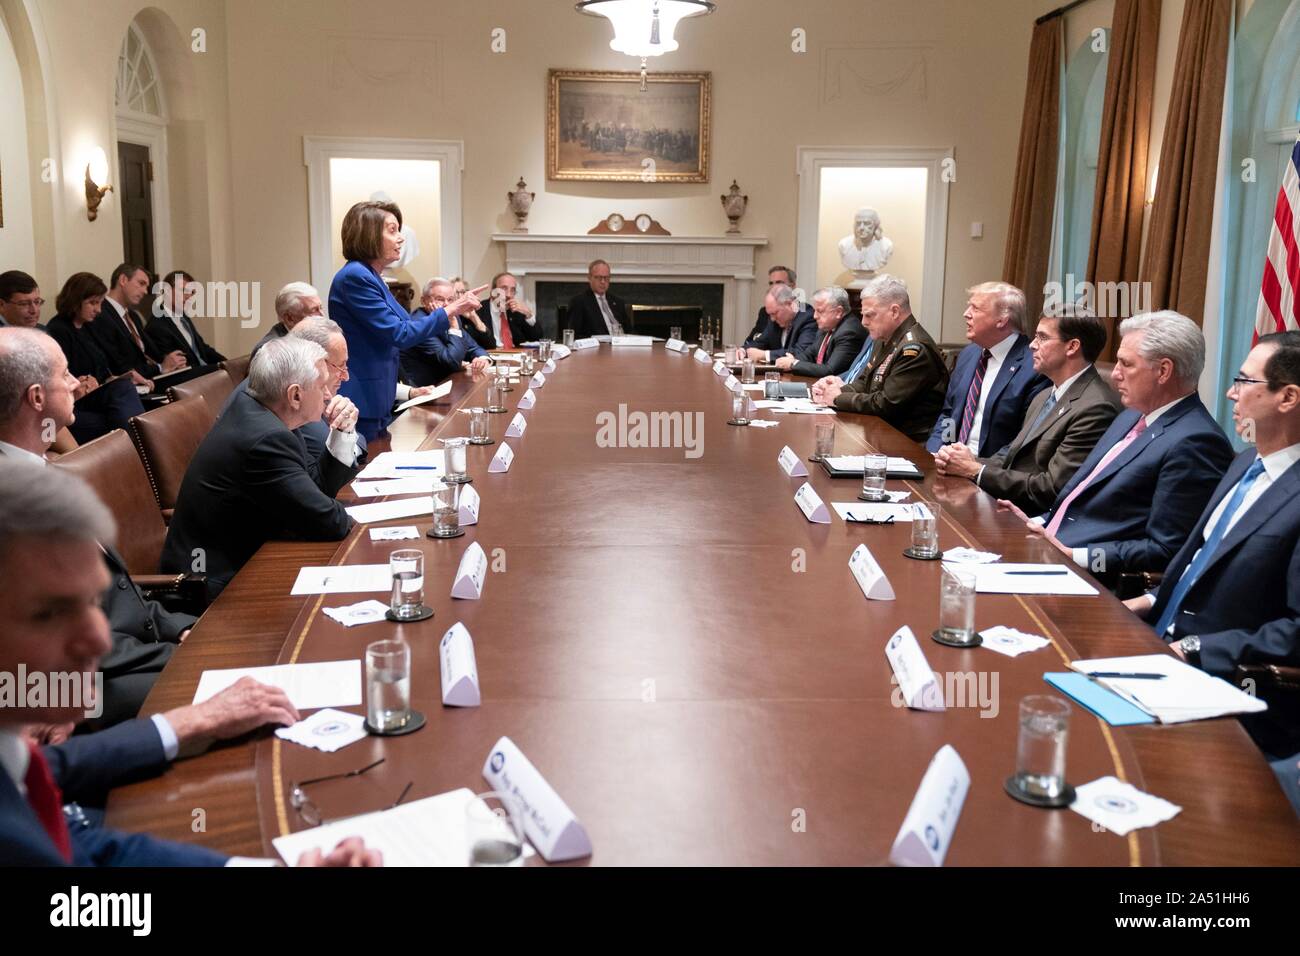 Washington, United States of America. 16 October, 2019. U.S Speaker of the House Nancy Pelosi, left, confronts President Donald Trump, right, after he insulted her during a meeting on Syria in the Cabinet Room of the White House October 16, 2019 in Washington, DC. The meeting called by the president to discuss the crisis along the Syrian - Turkey border devolved into a confrontation before the Speaker walked out.   Credit: Shealah Craighead/White House Photo/Alamy Live News Stock Photo